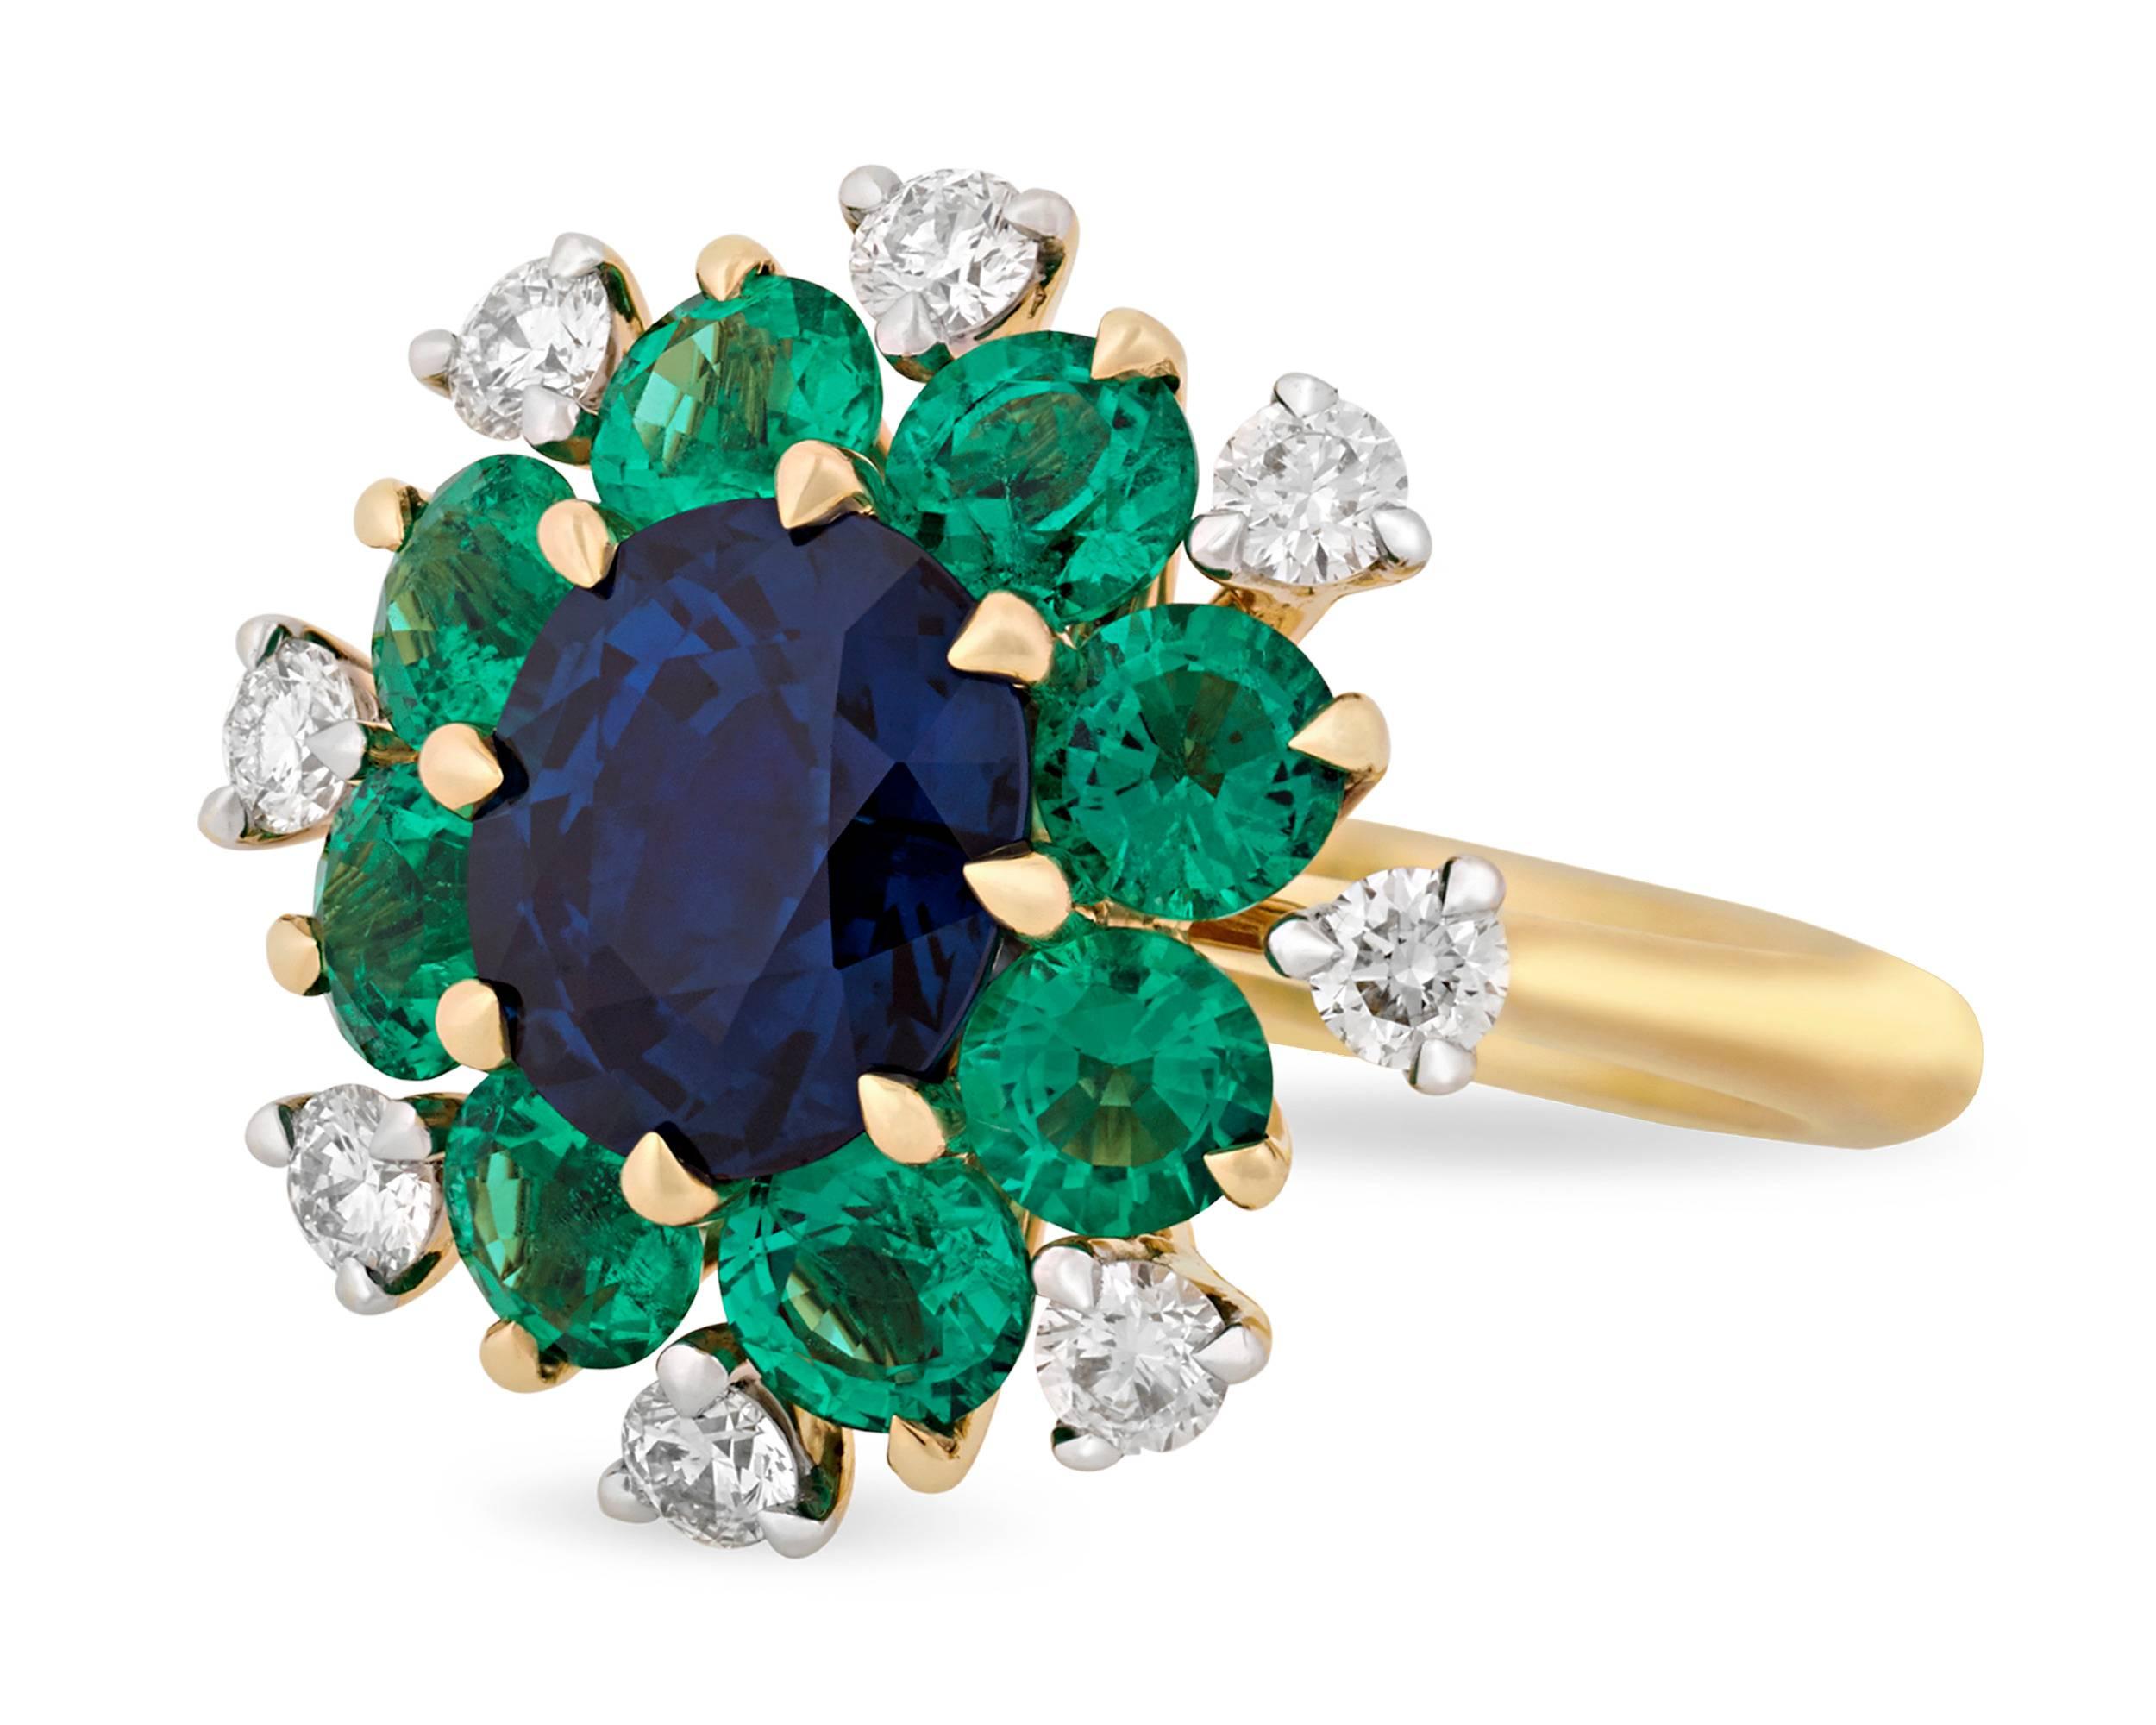 The unmistakable beauty of sapphires and emeralds distinguish this elegant ring. Designed to resemble a flower, this 18K gold ring is centered by a 2.56-carat rich blue sapphire encircled by eight green emeralds totaling 1.93 carats and eight white